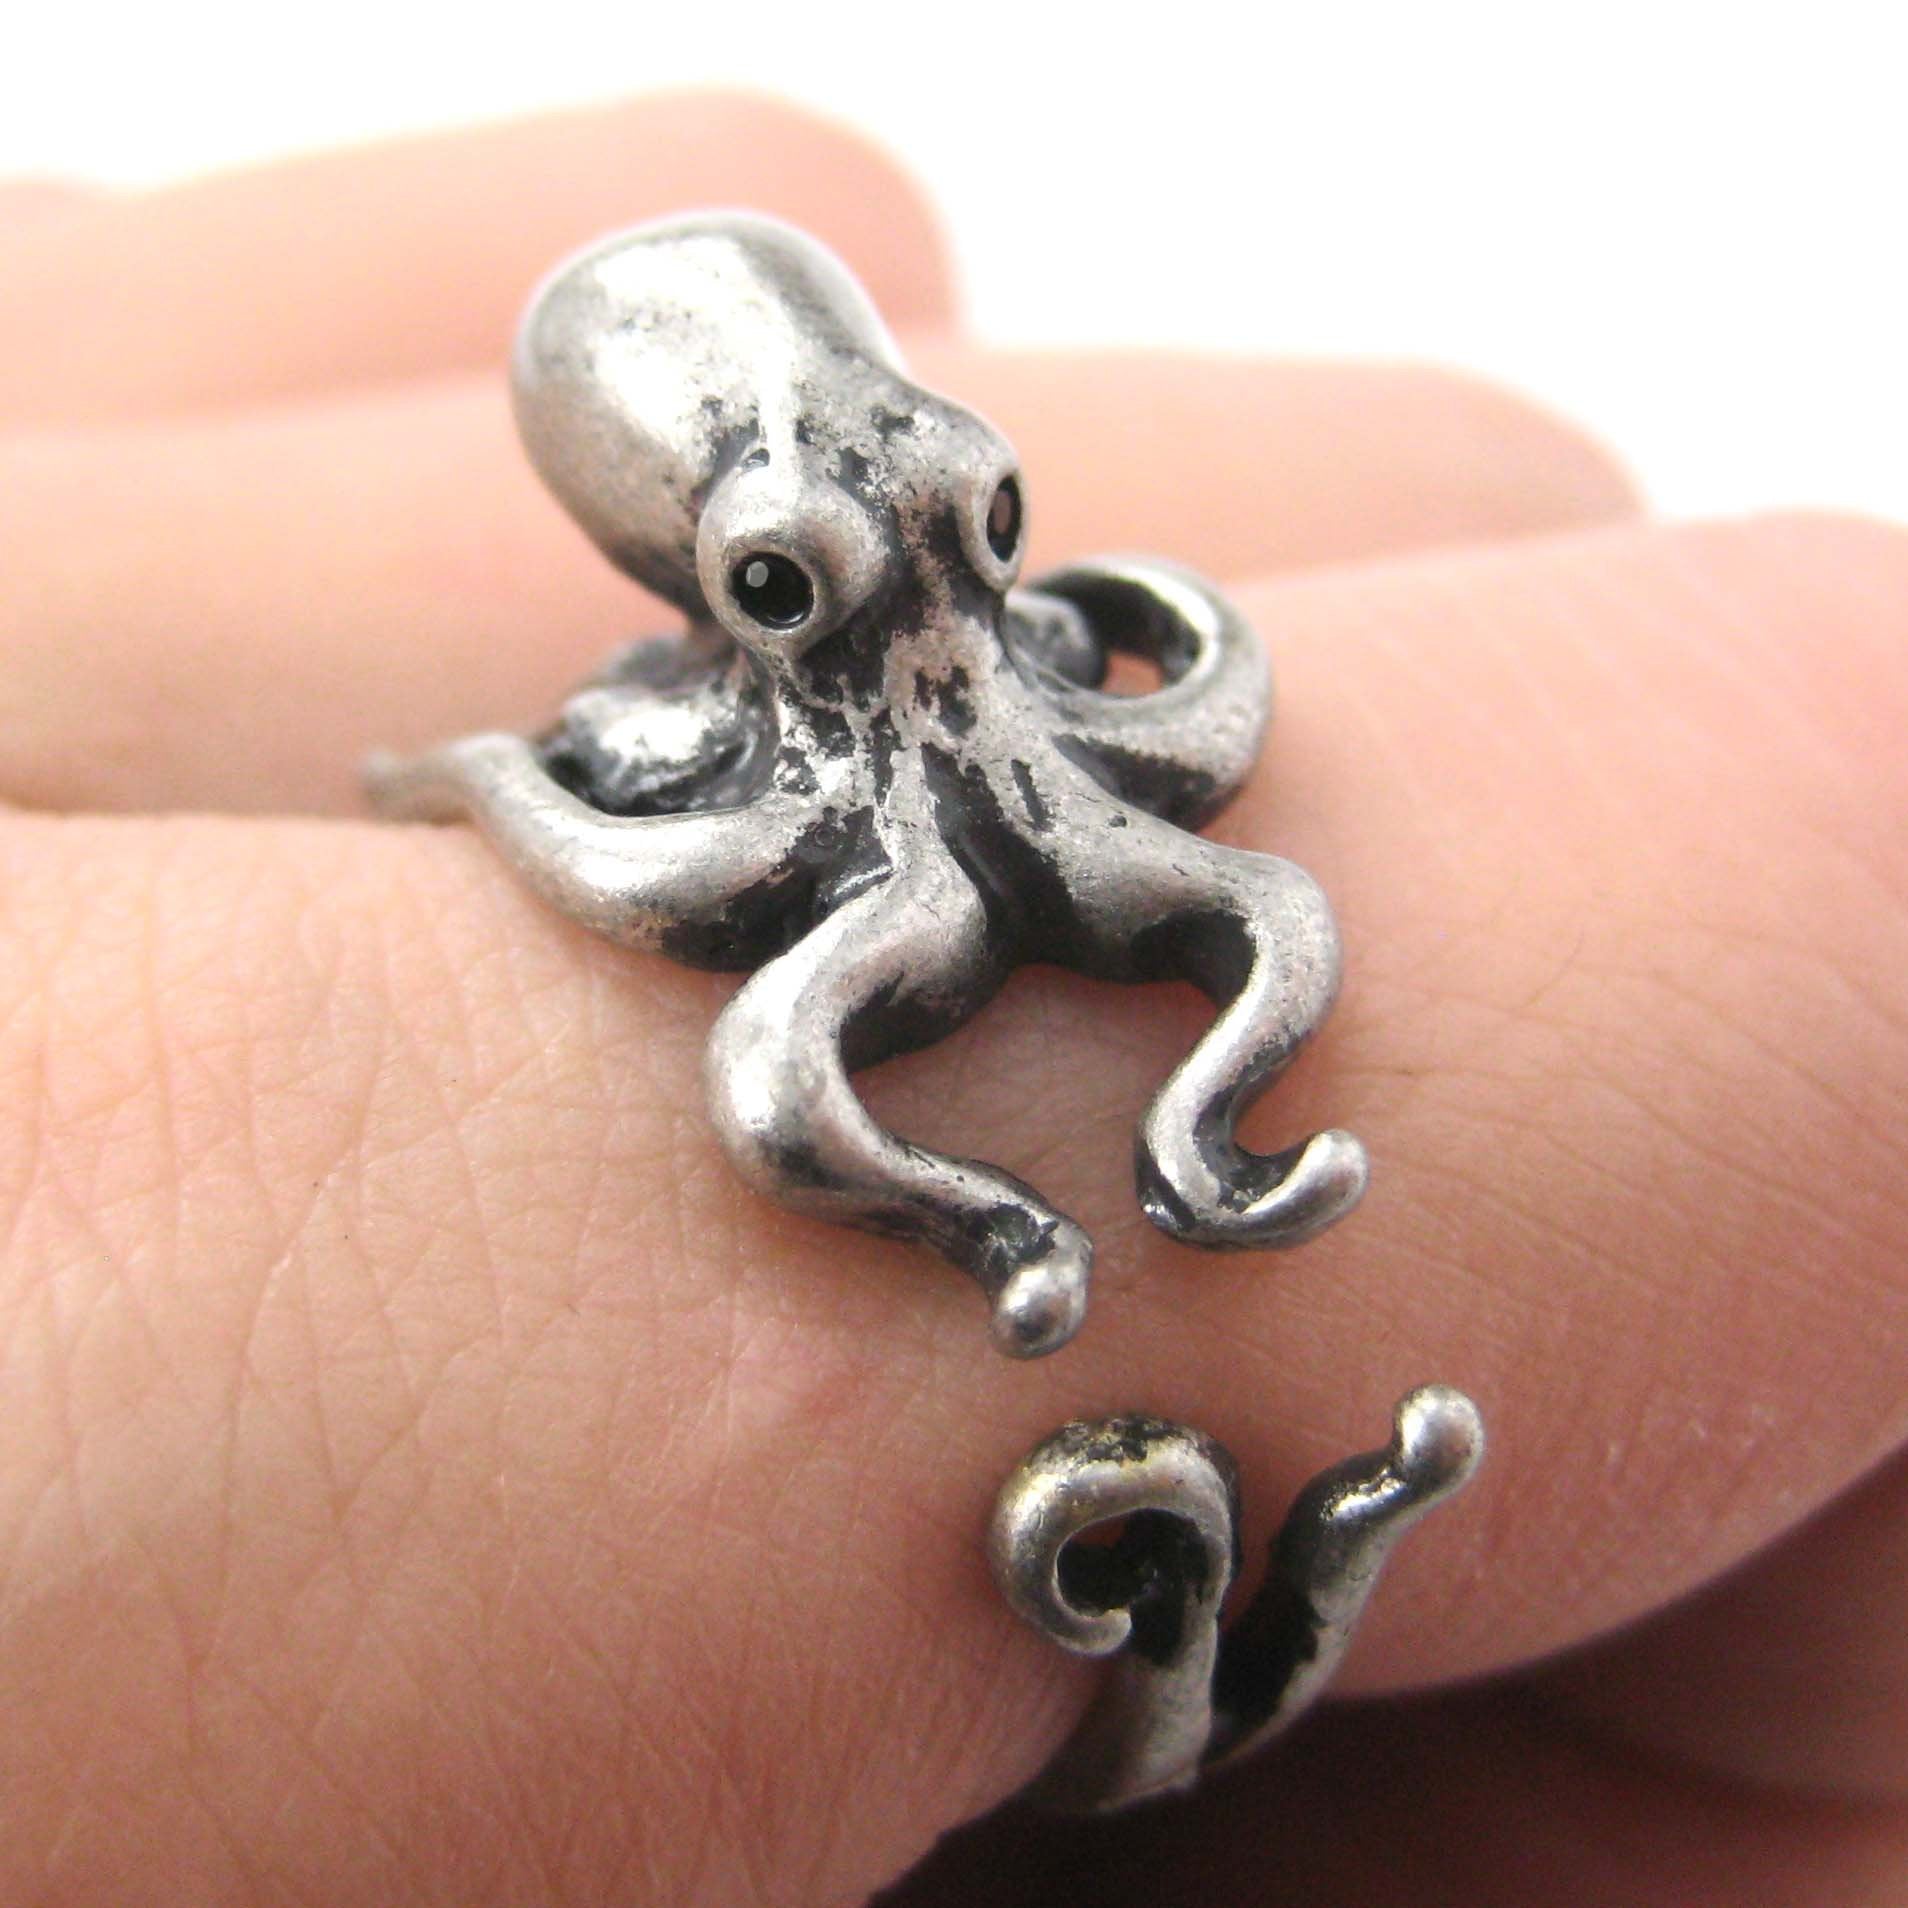 Octopus Squid Sea Animal Wrap Around Hug Ring in Silver - Size 4 to 9